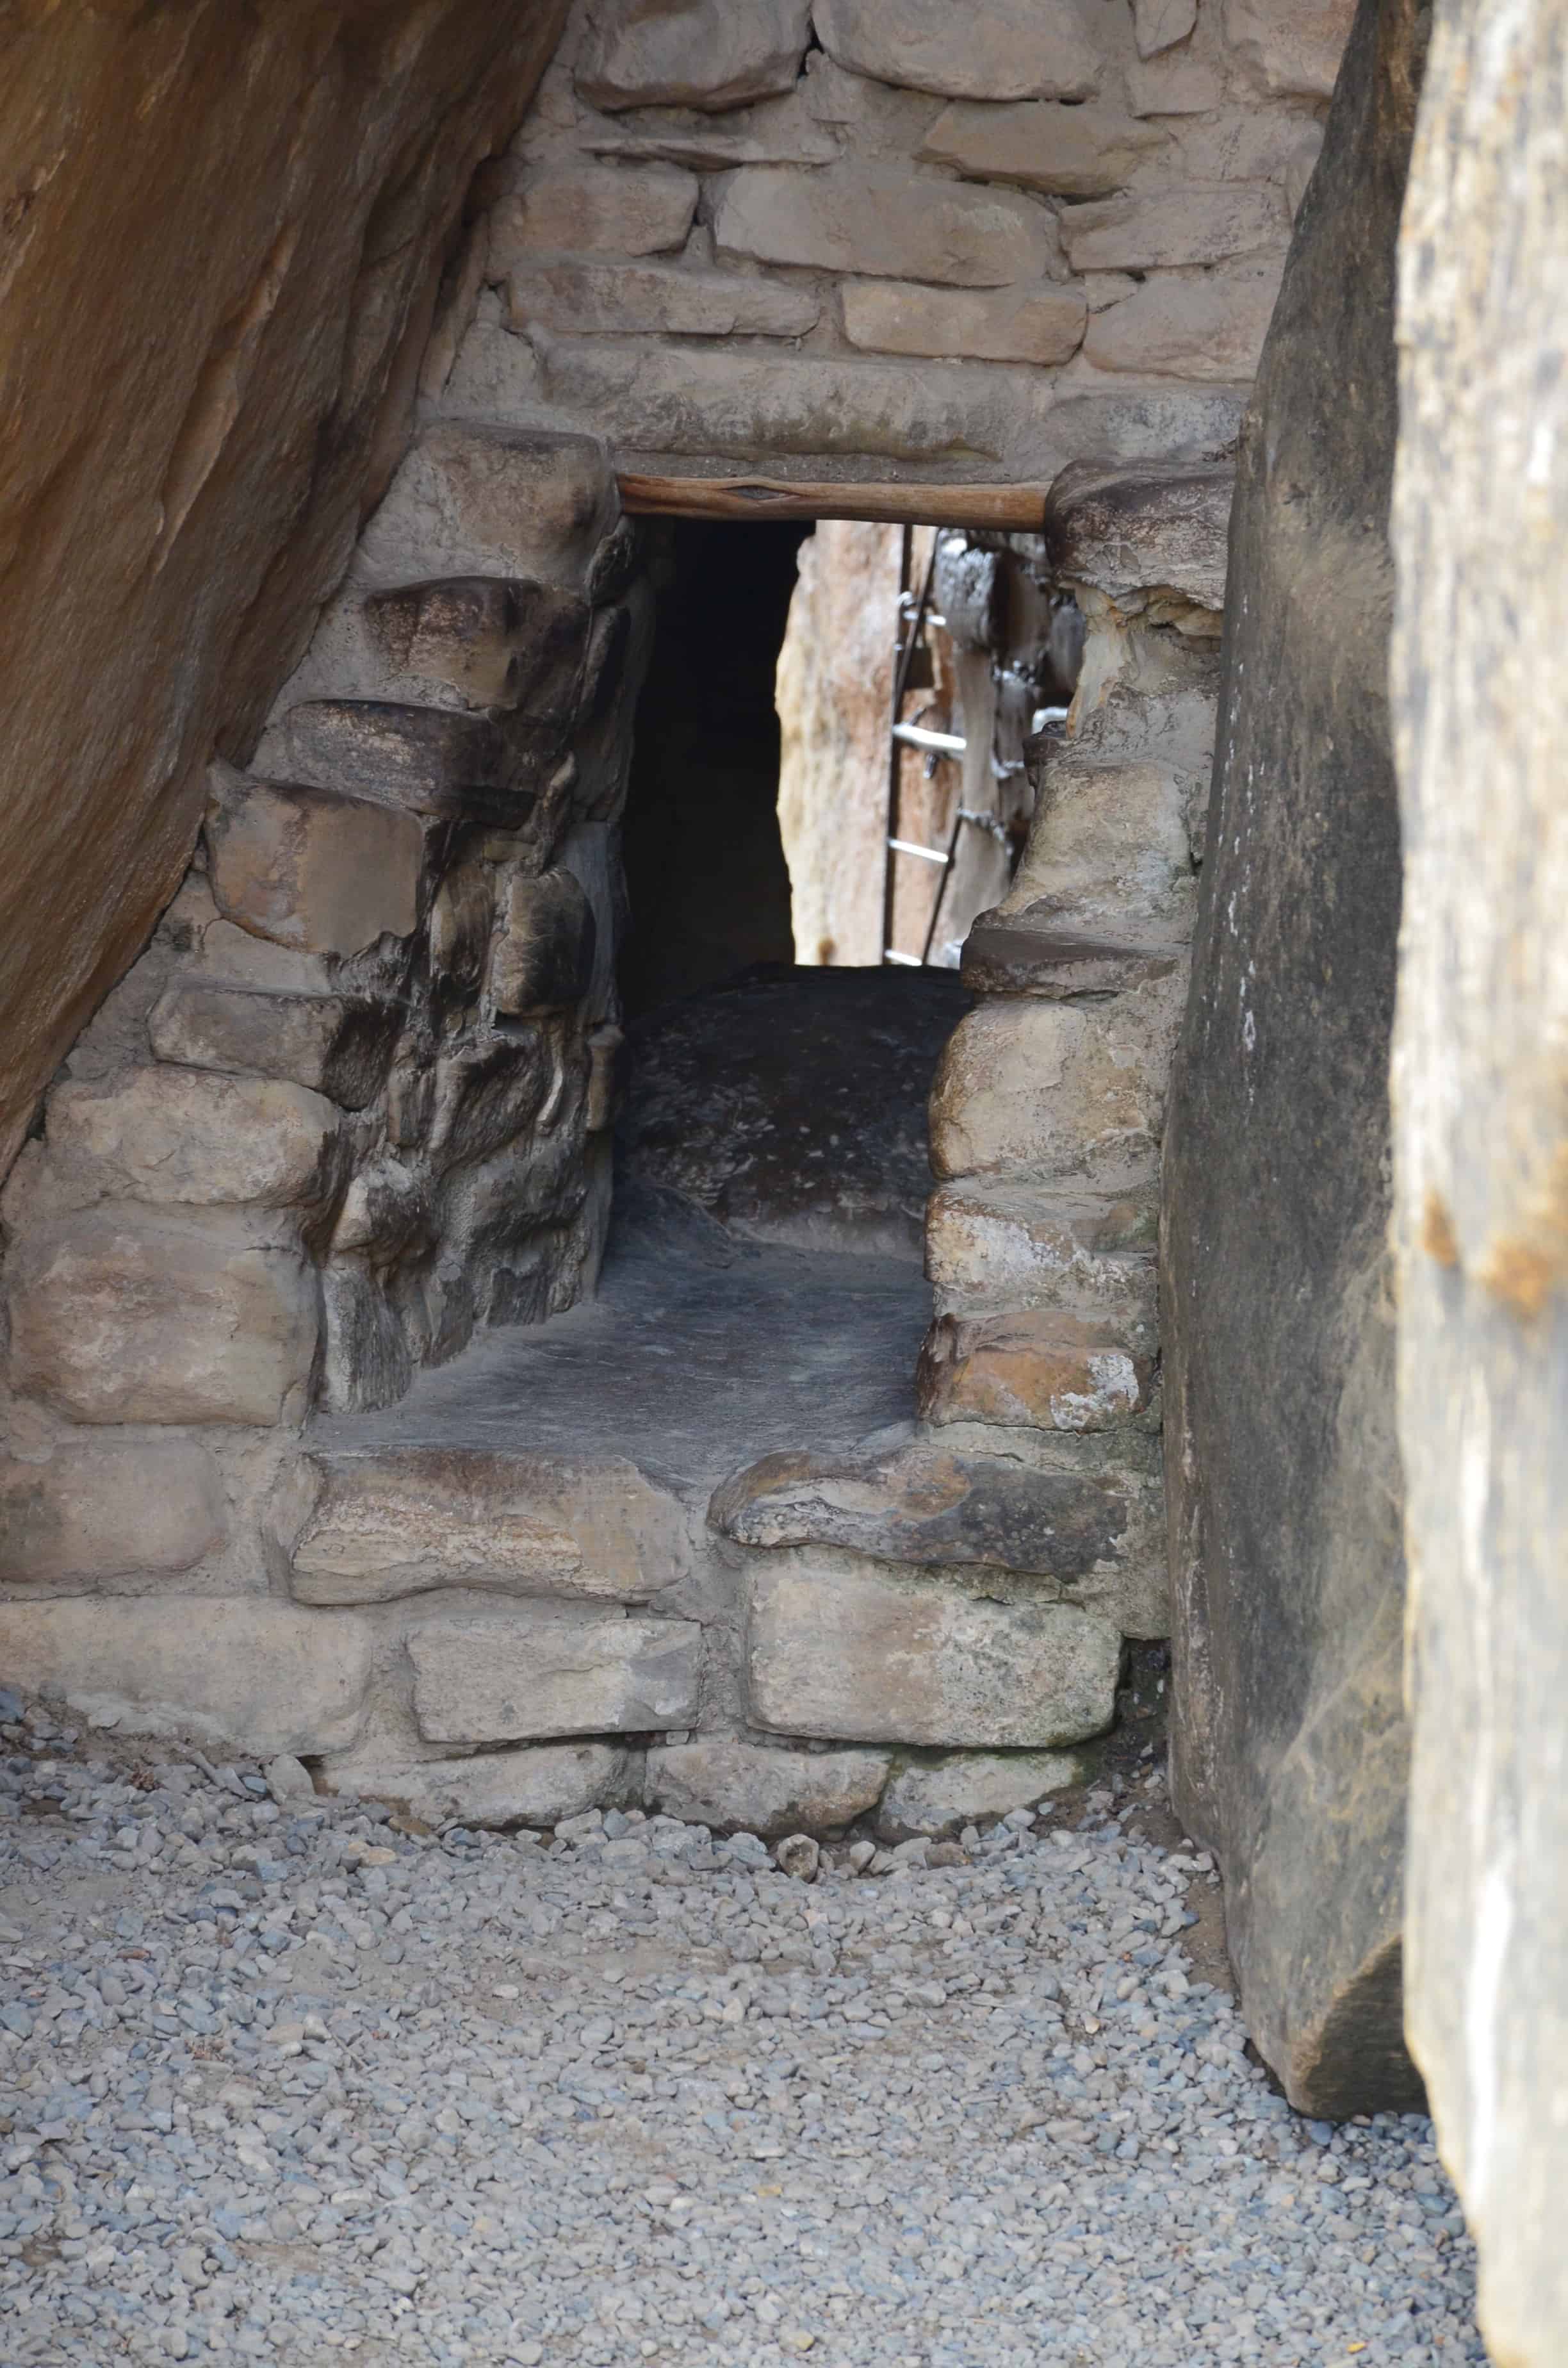 Tunnel on the Balcony House tour at Mesa Verde National Park in Colorado